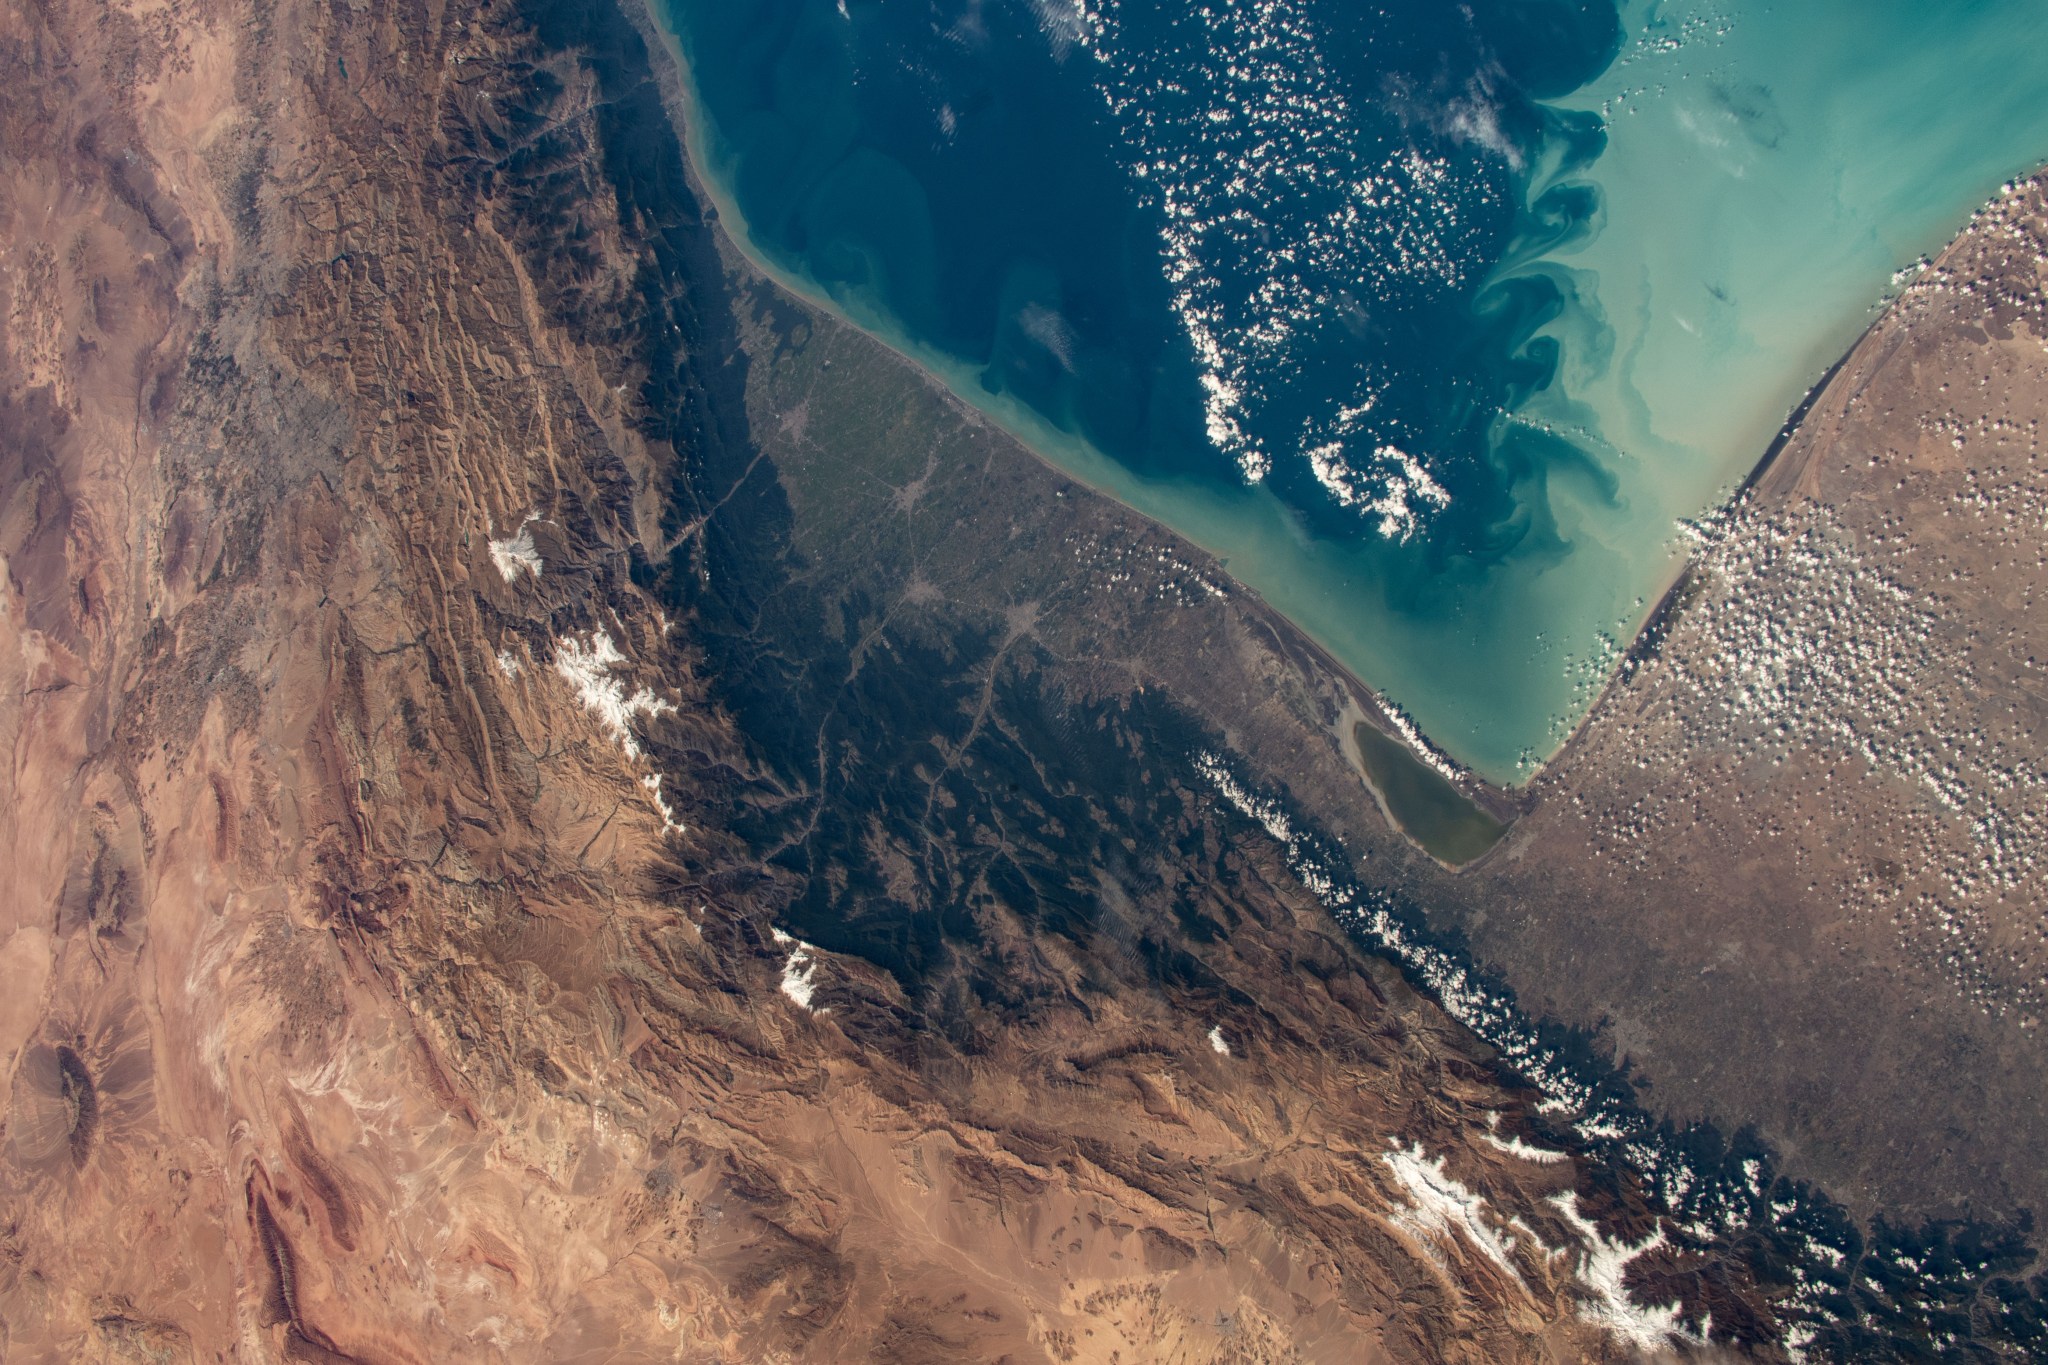 The Caspian Sea and cities and towns on the coast of northern Iran are pictured from the International Space Station as it orbited 259 miles above.